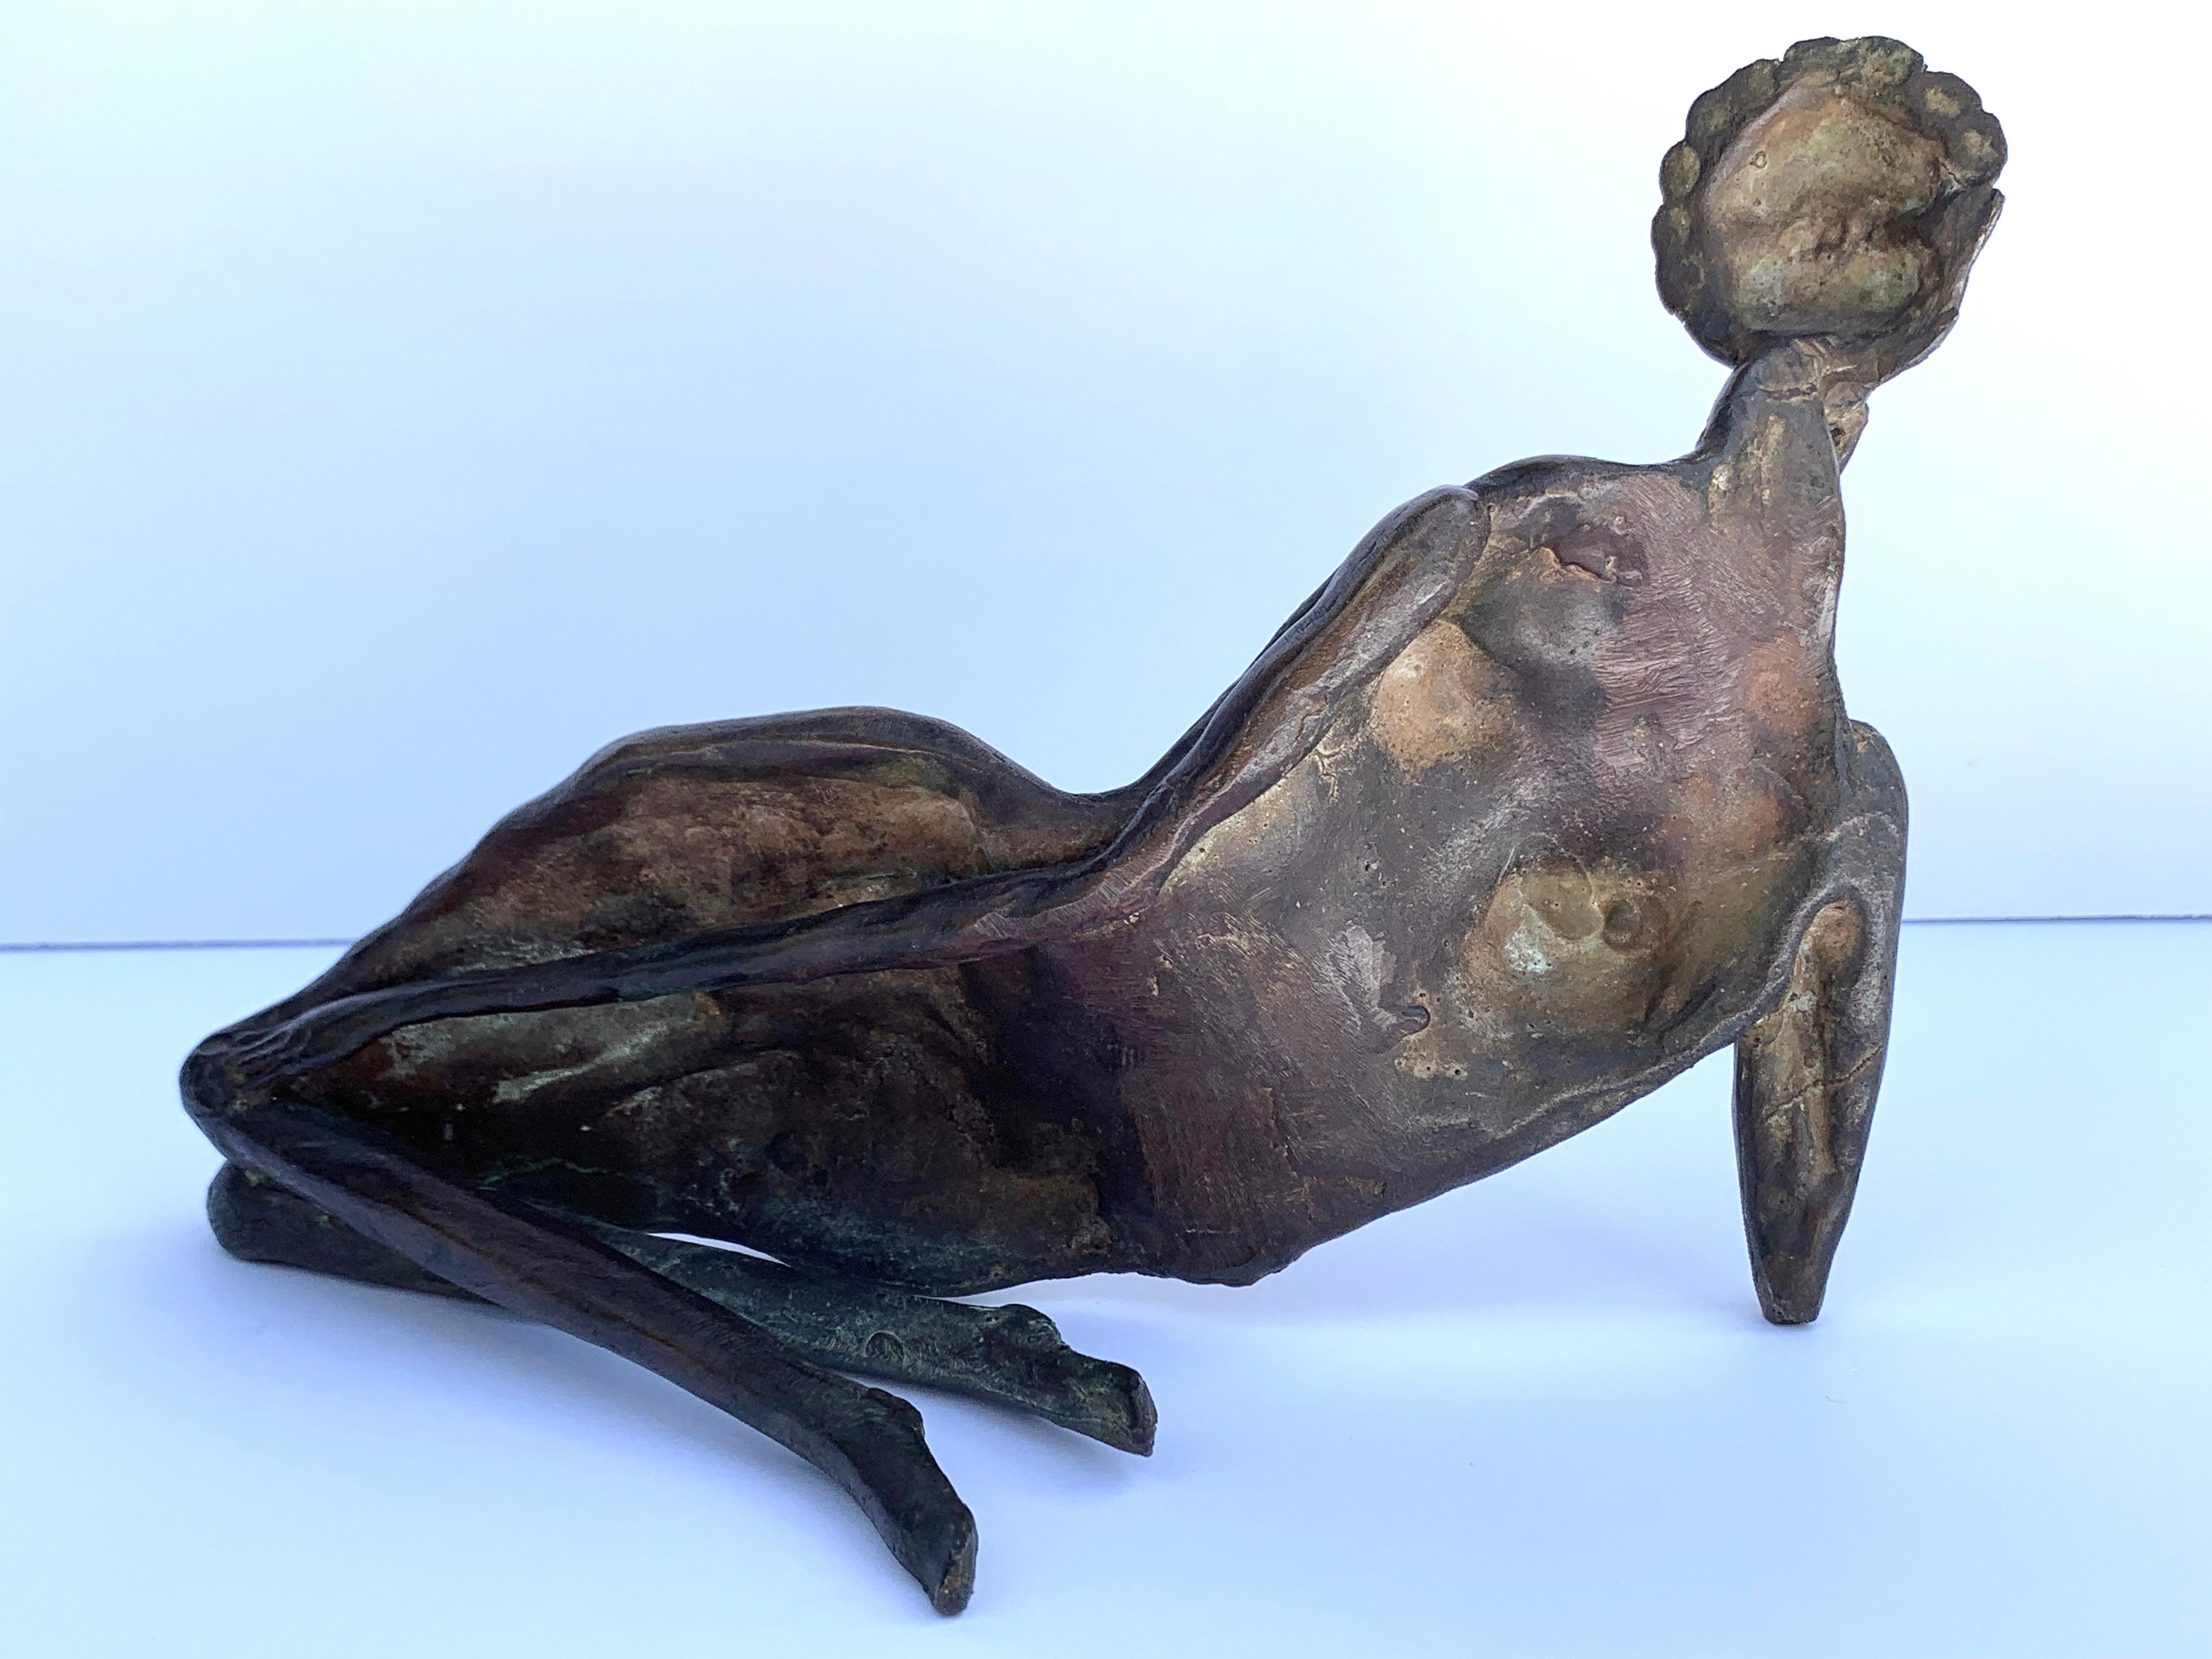 William King (1925-2015). Reclining figure, ca. 1965. Cast and welded bronze, 7 x 9.5 x 5 inches. Unsigned. 

William King, a sculptor in a variety of materials whose human figures traced social attitudes through the last half of the 20th century,